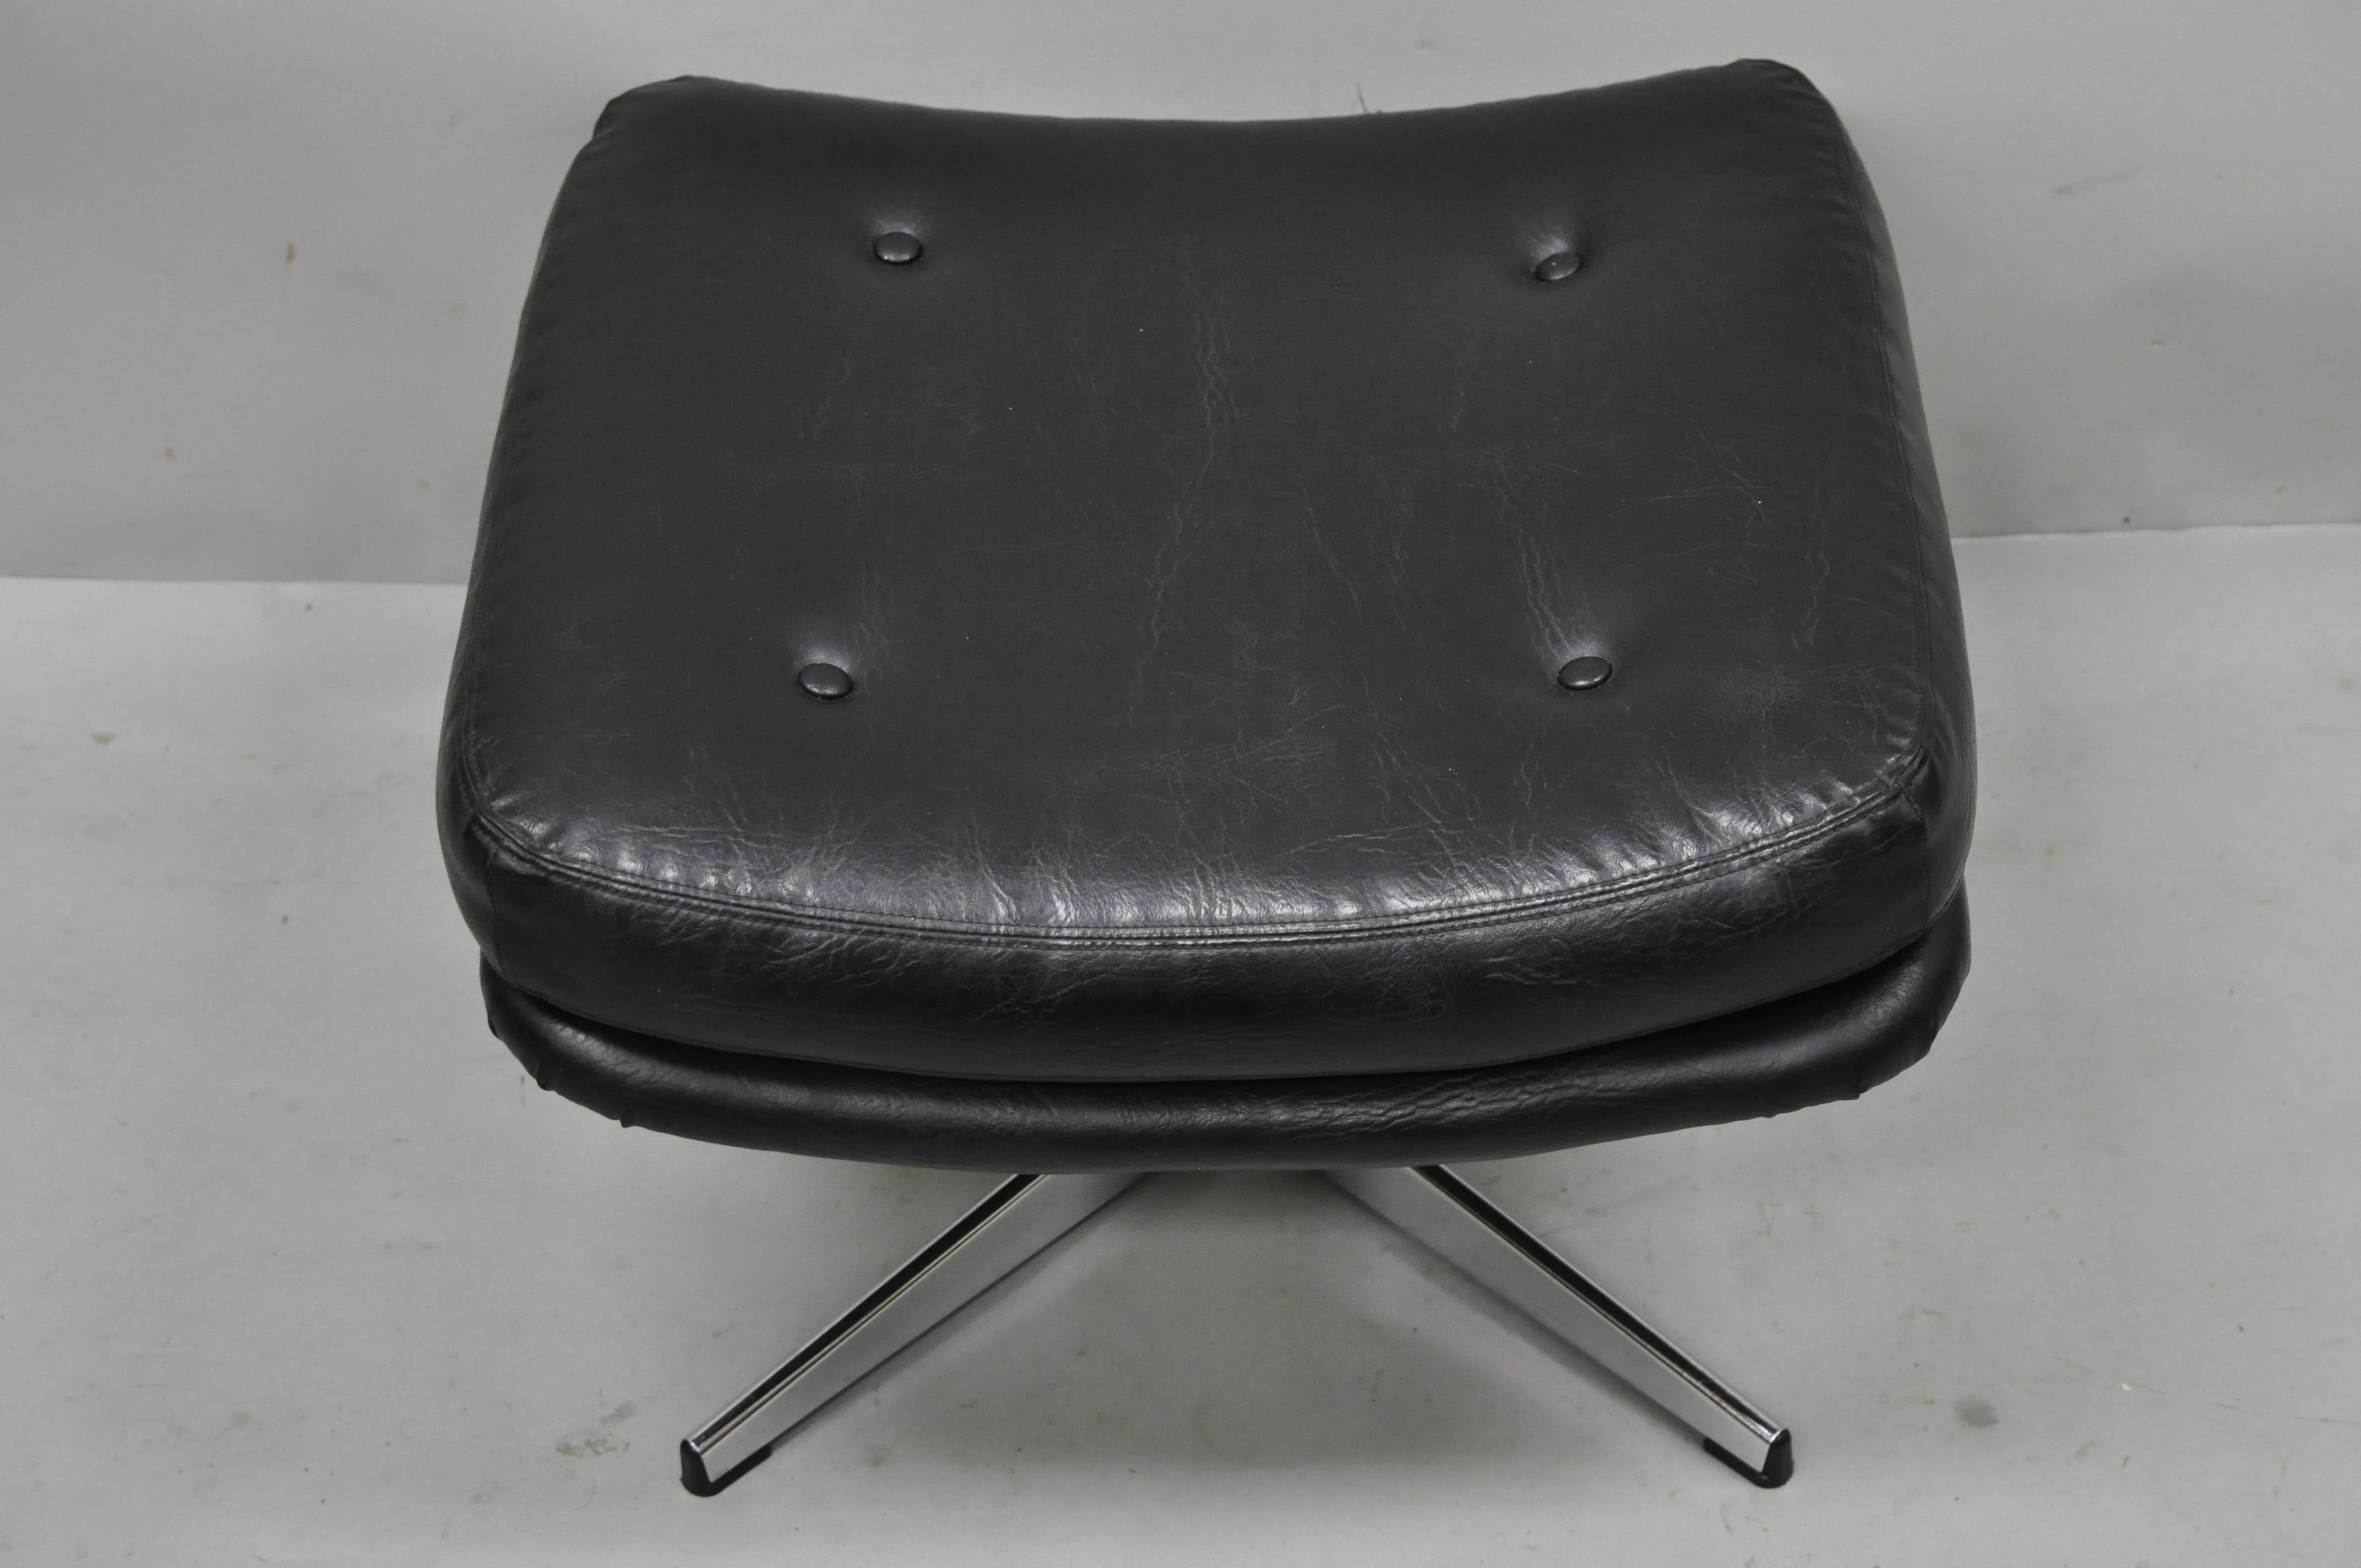 Vintage overman swivel black vinyl ottoman footstool chrome base to egg chair. Item features chrome swivel base, button tufted black naugahyde upholstery, unmarked, very nice vintage item, quality American craftsmanship, great style and form. Circa